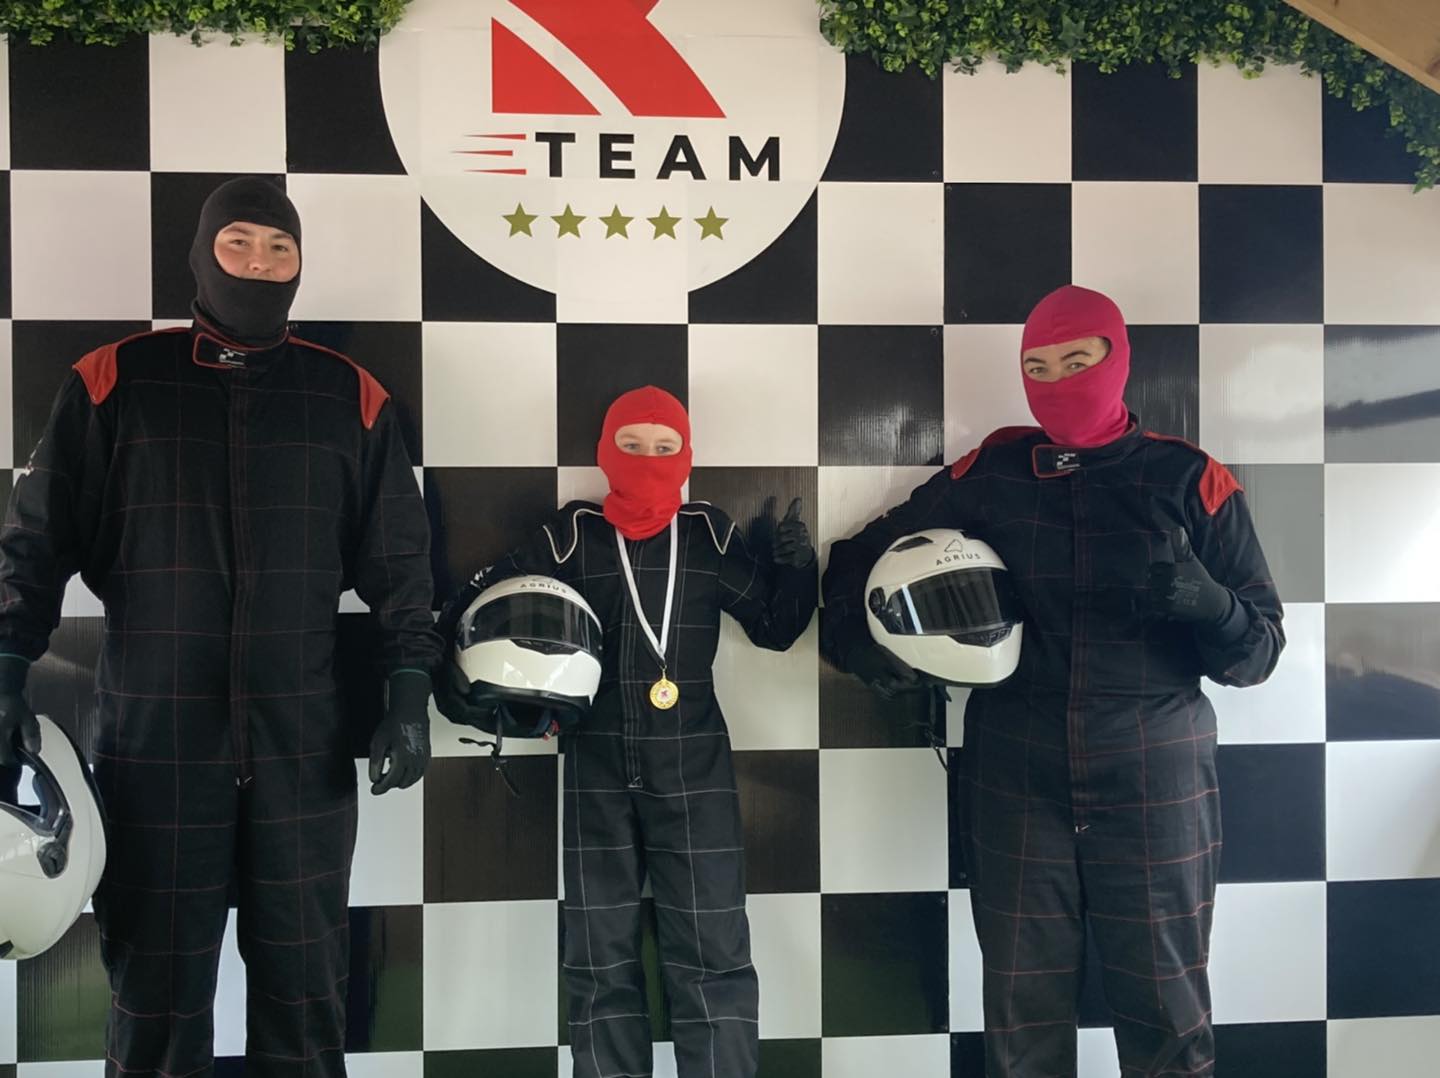 family day out karting in Coleraine | Northern Ireland